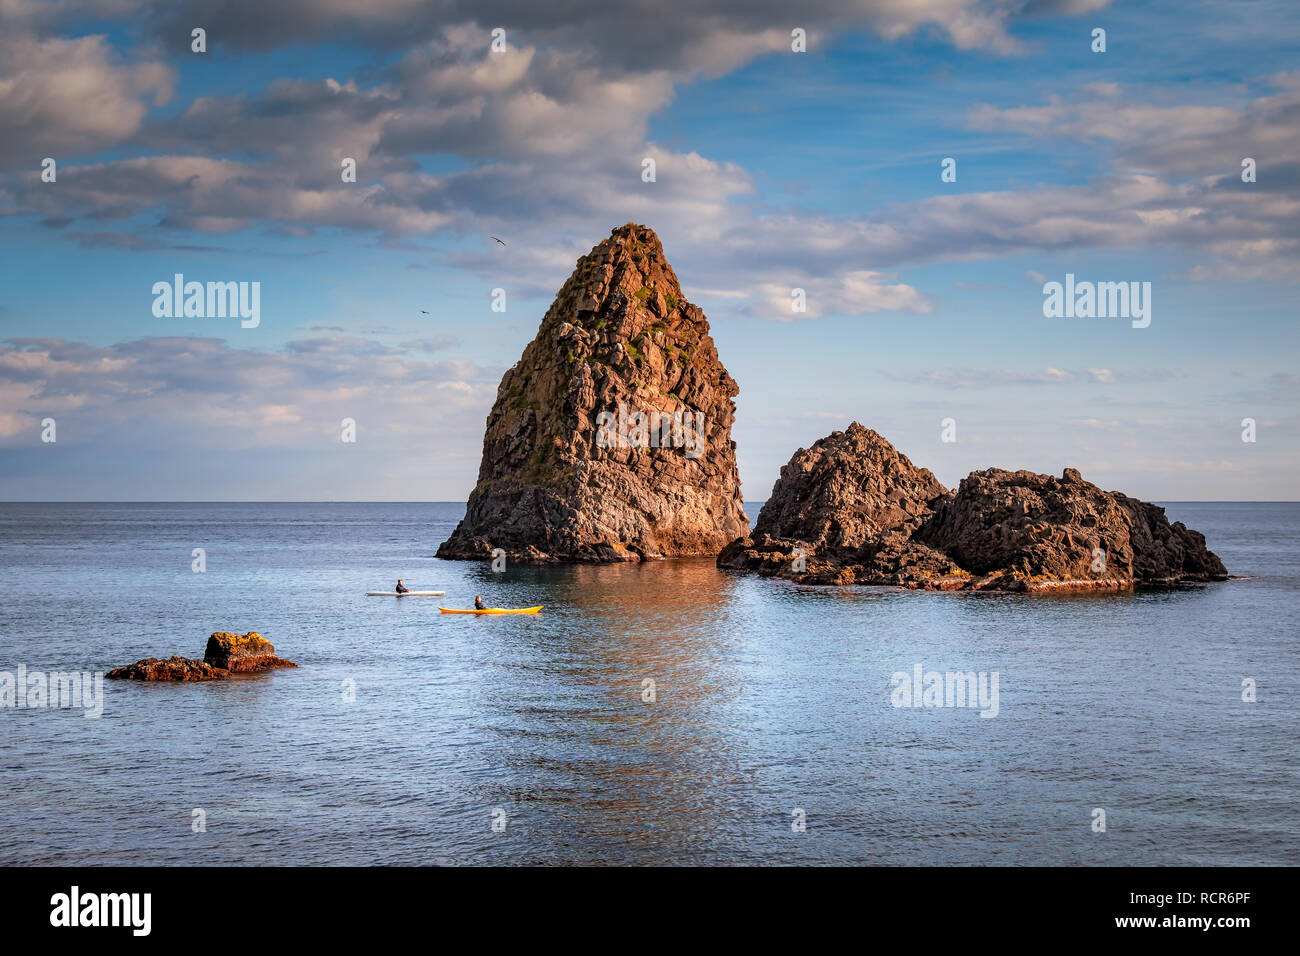 Two guys canoeing close the sea stacks of Aci trezza during a sunny winter day, Sicily, Italy Stock Photo